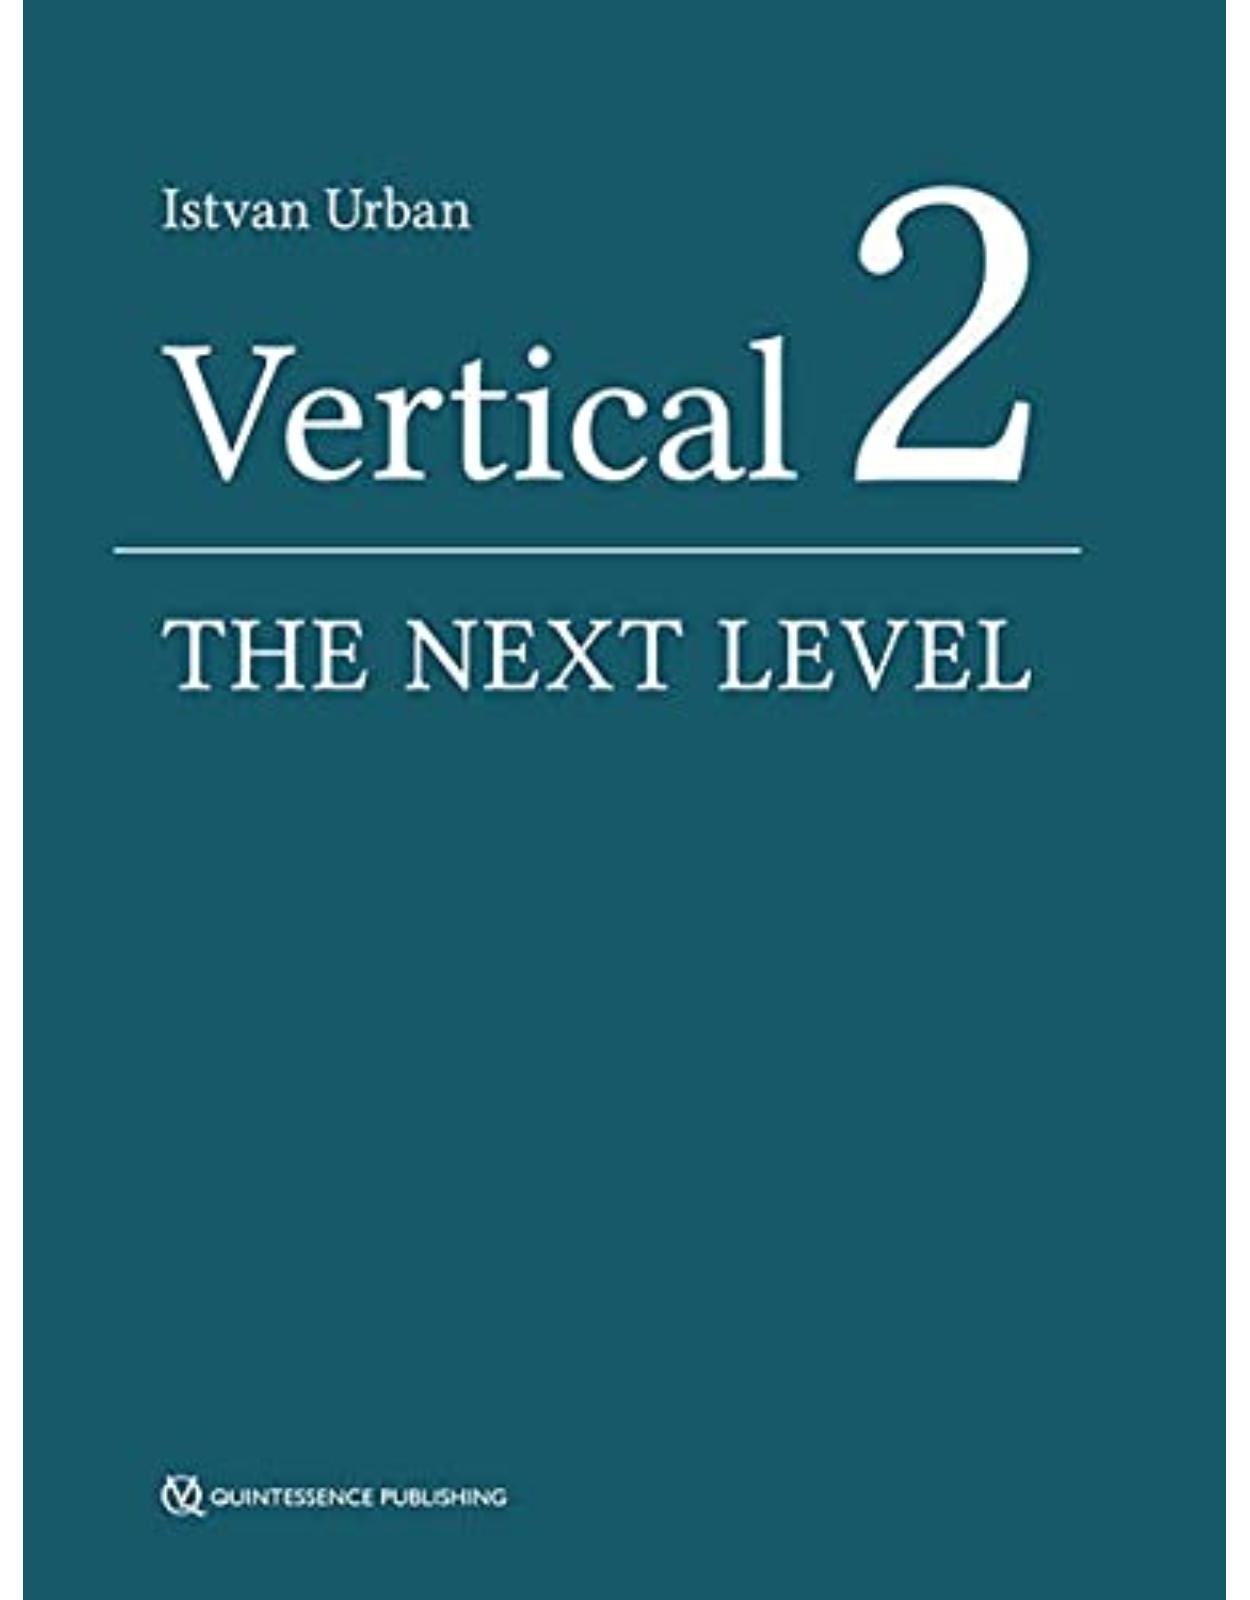 Vertical 2: The Next Level of Hard and Soft Tissue Augmentation